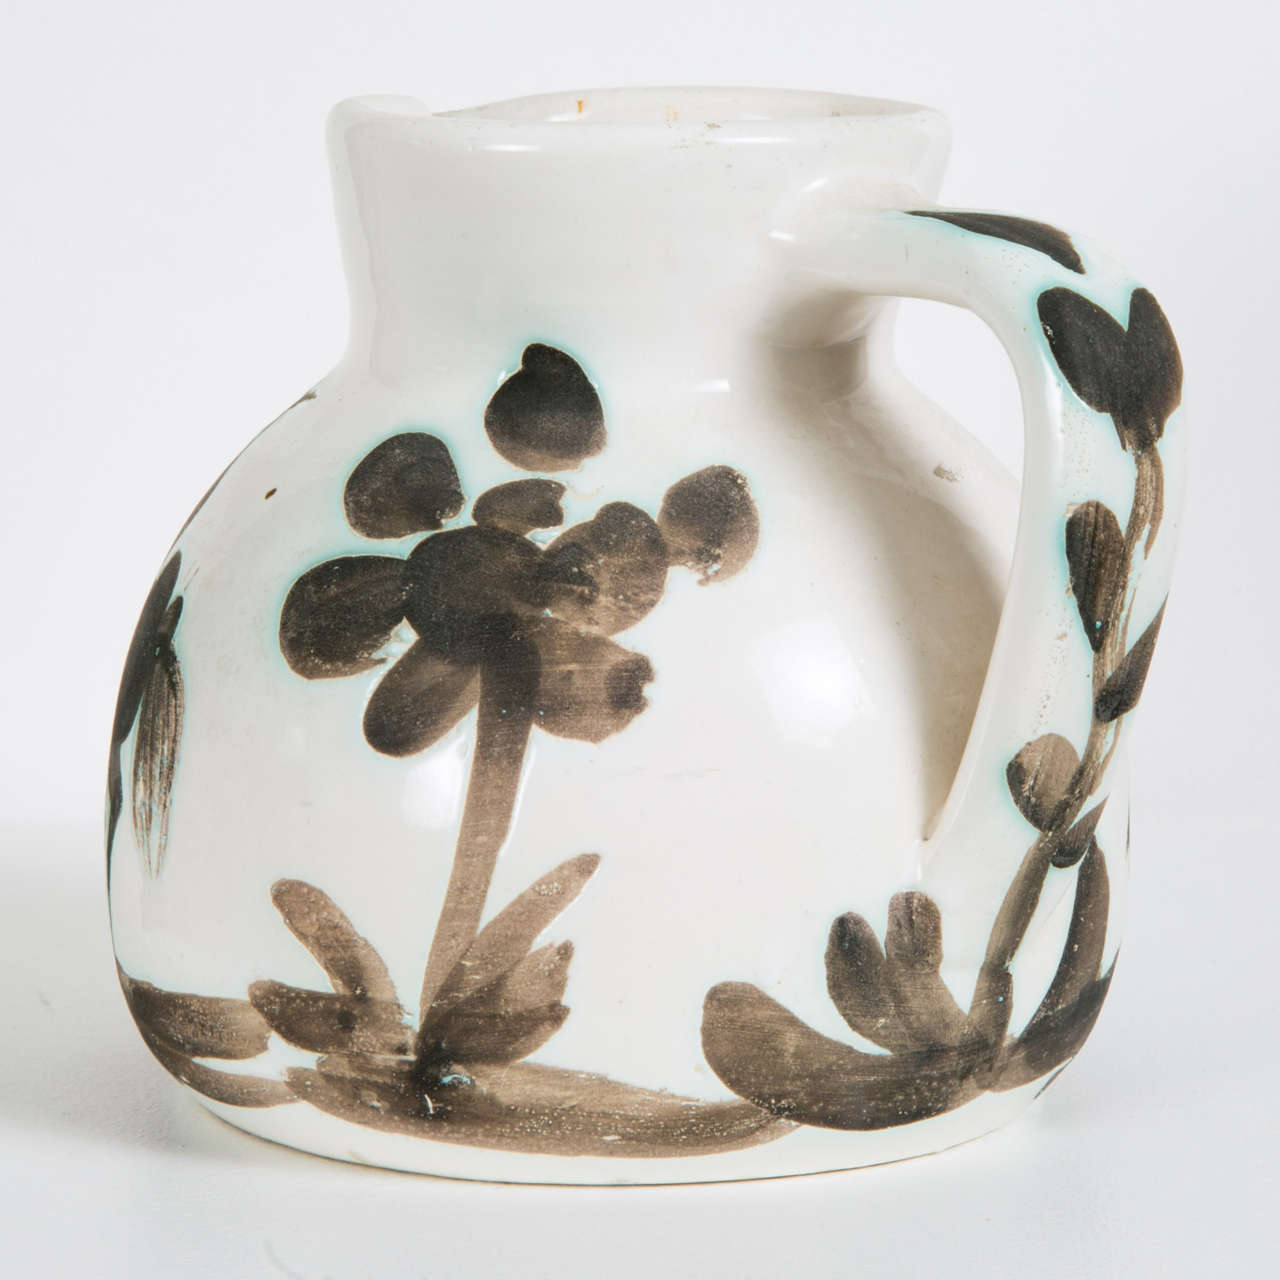 Terre-de-faïence pitcher with oxidized paraffin decoration.
Picasso Edition, Madoura 
Stamped 